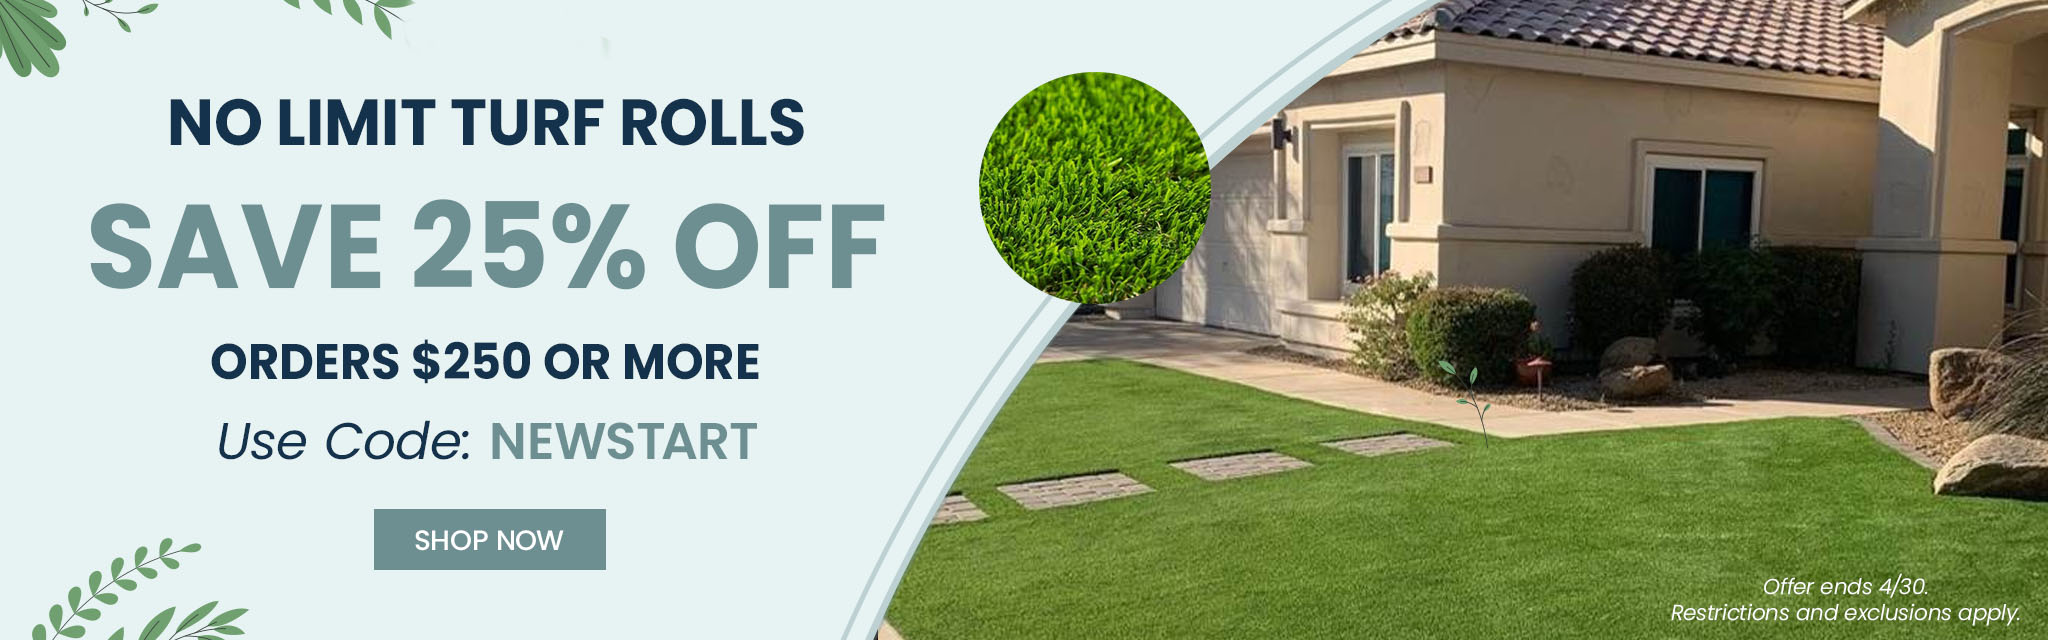 No Limit Turf Rolls. Save 25% Off Order $250 Or More. Use Code: NEWSTART Shop Now. Offer ends April 30th. Restrictions and exclusions apply.